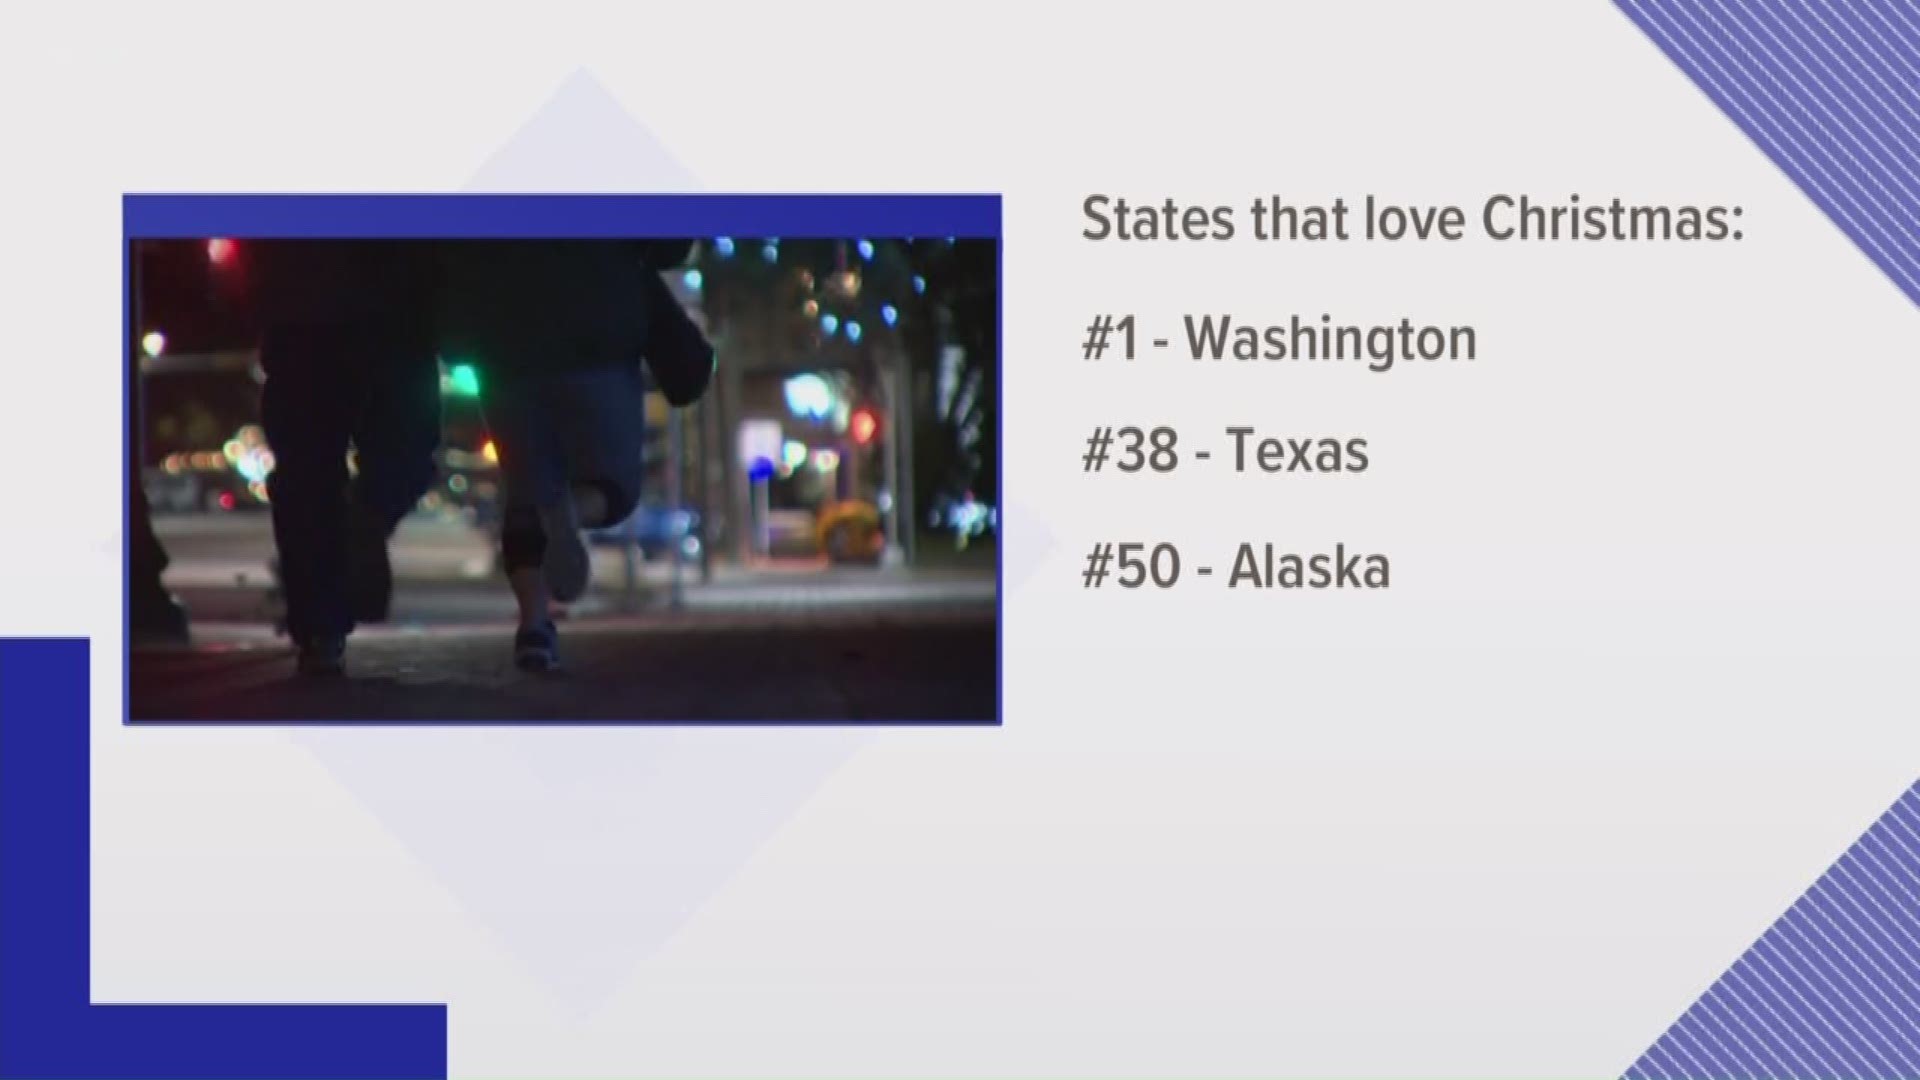 CenturyLink did a study ranking how many states love Christmas. Texas came in at 38th on the list.